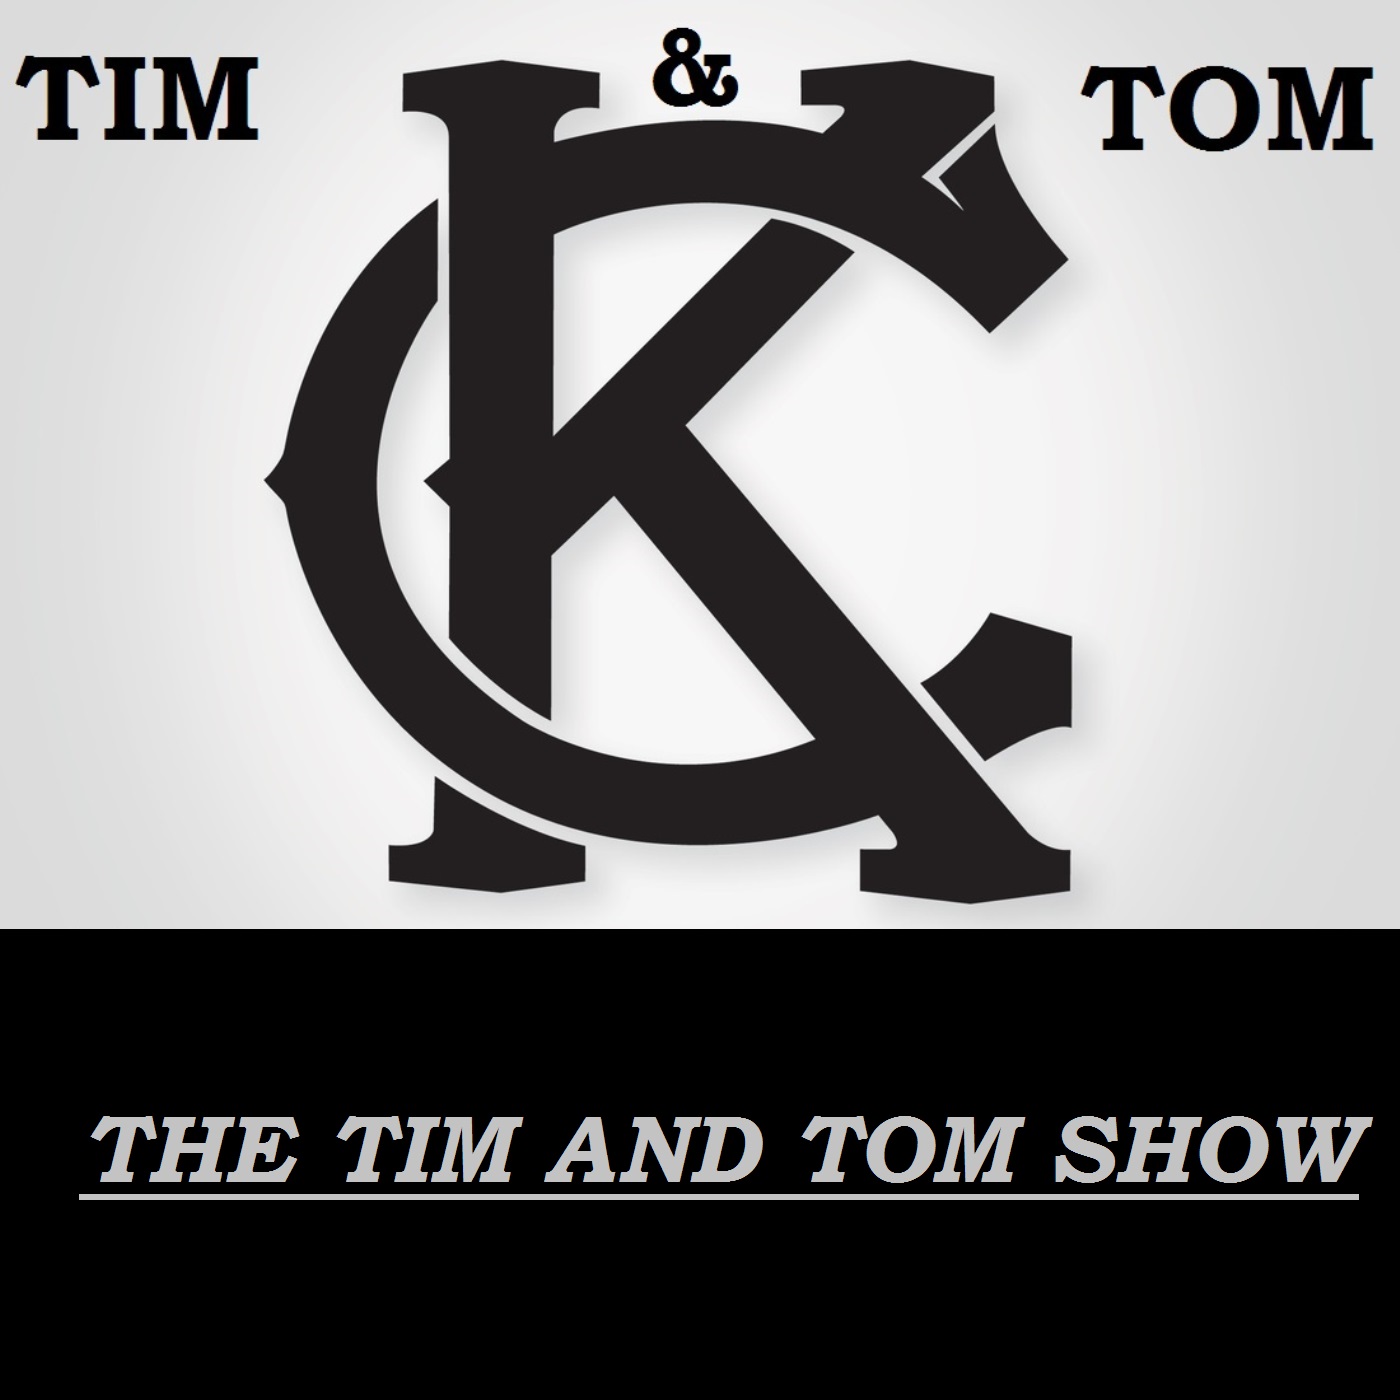 The Tim and Tom Show - Episode 11 - with Sarah Bradshaw of 90.9 The Bridge